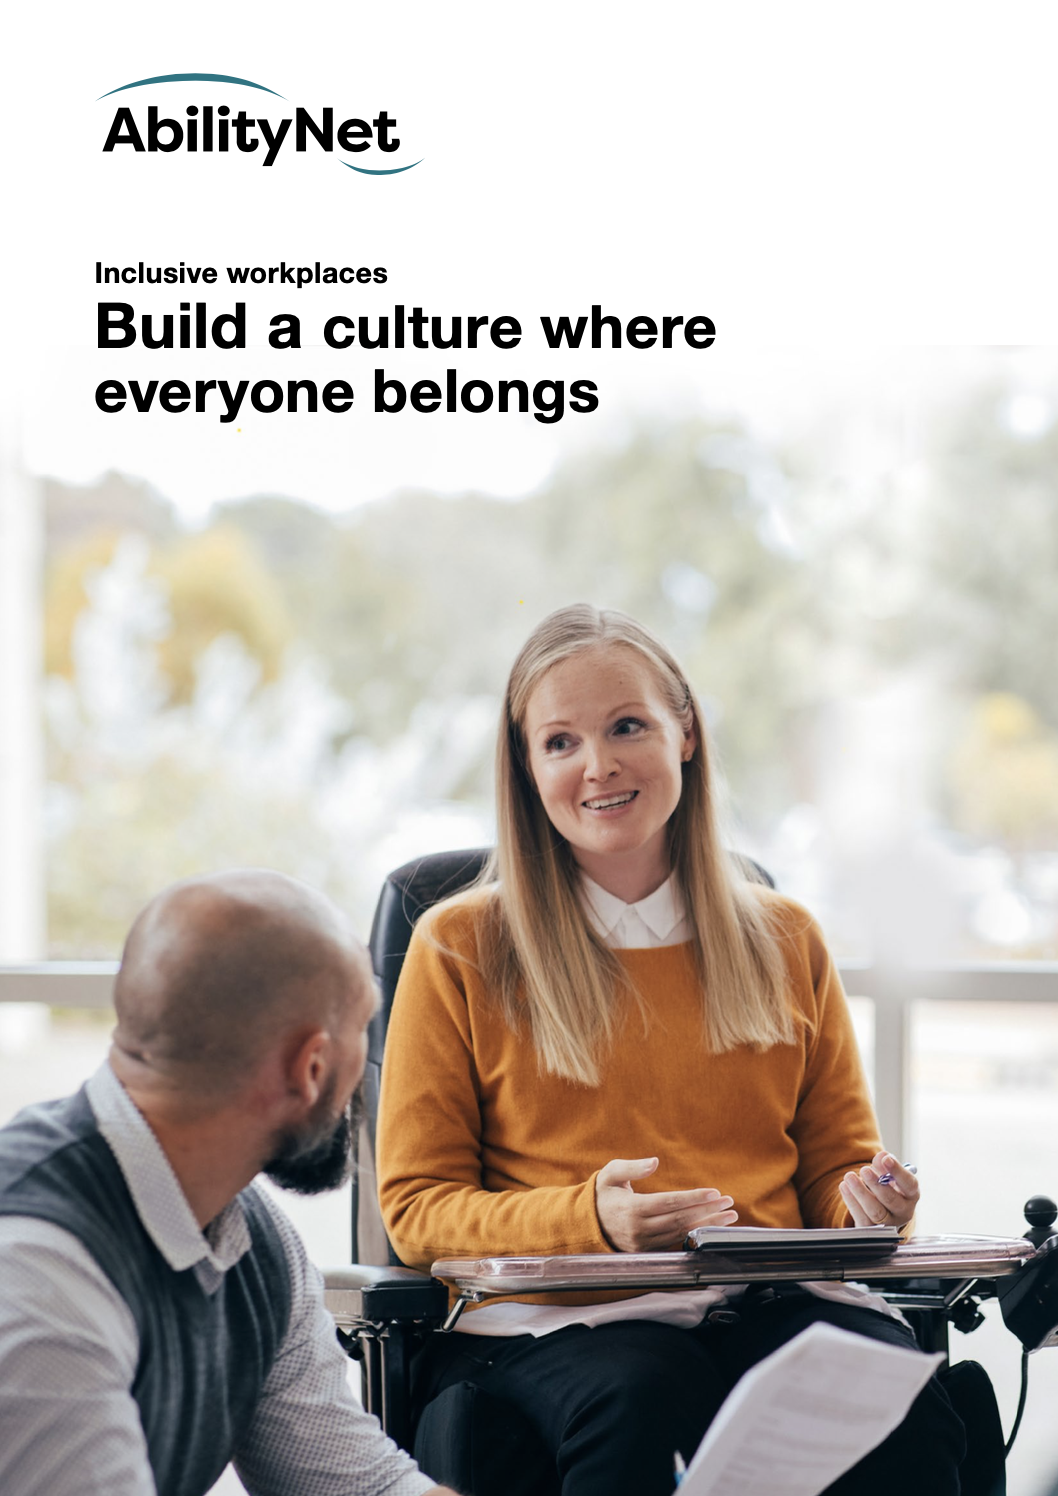 Front cover of downloadable document - featuring woman in a wheelchair on front, speaking to another person. Text reads: AbilityNet - Inclusive workplaces: Build a culture where everyone belongs